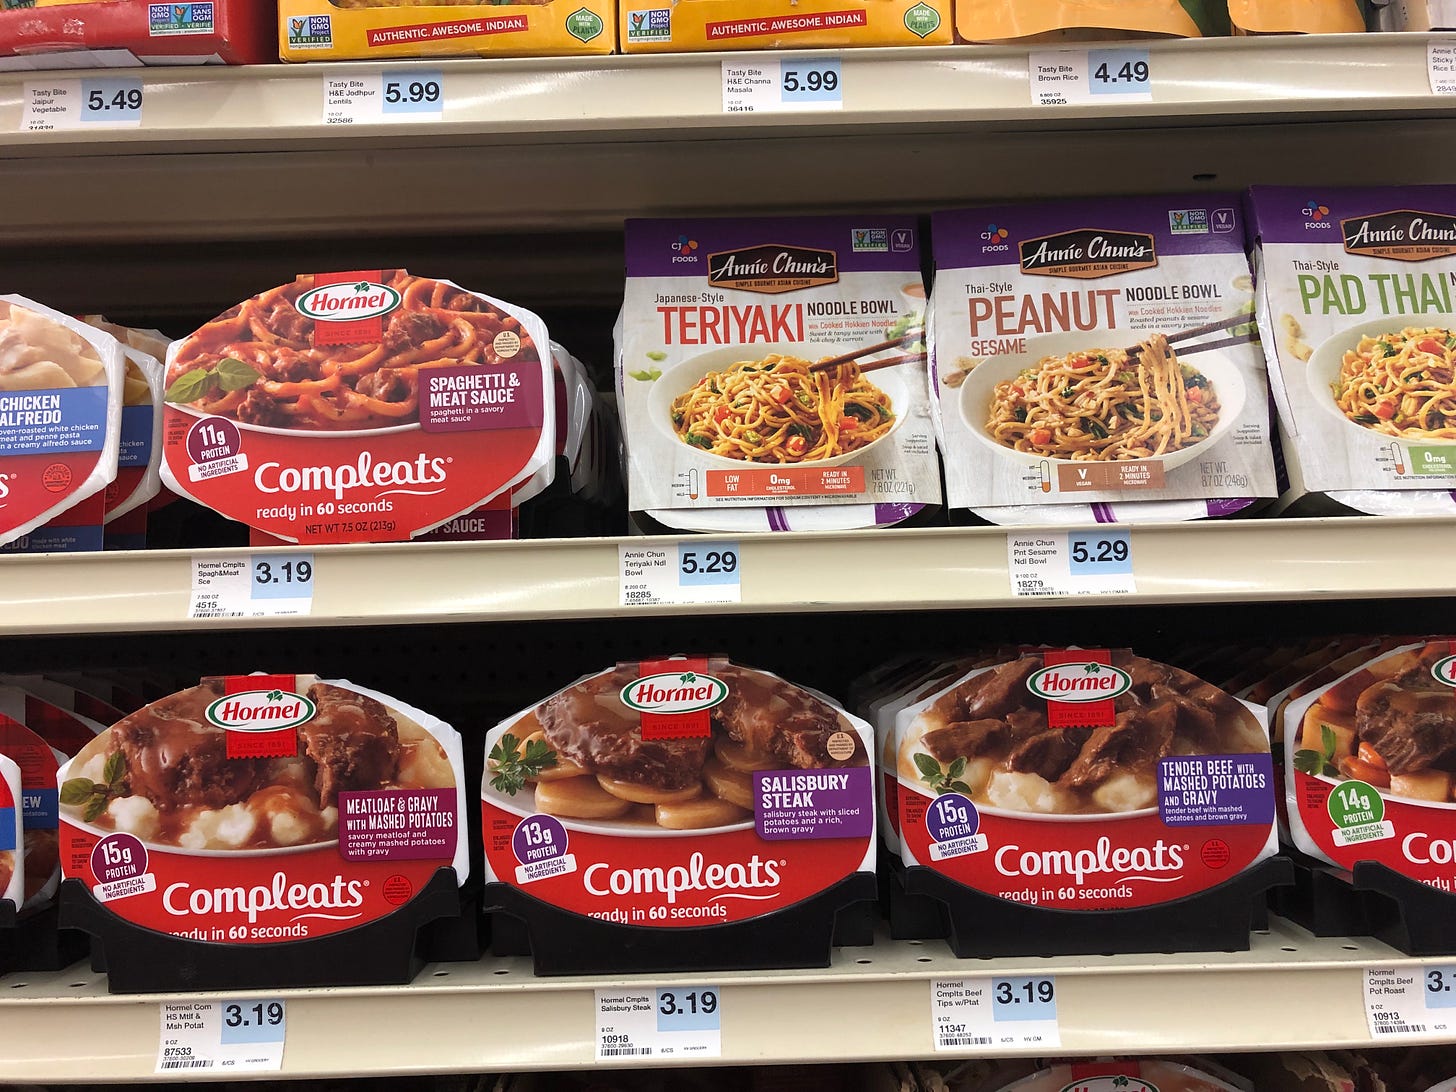 Microwave meals on the grocery shelf for 5.99, 3.19, 4.49, and 3.19